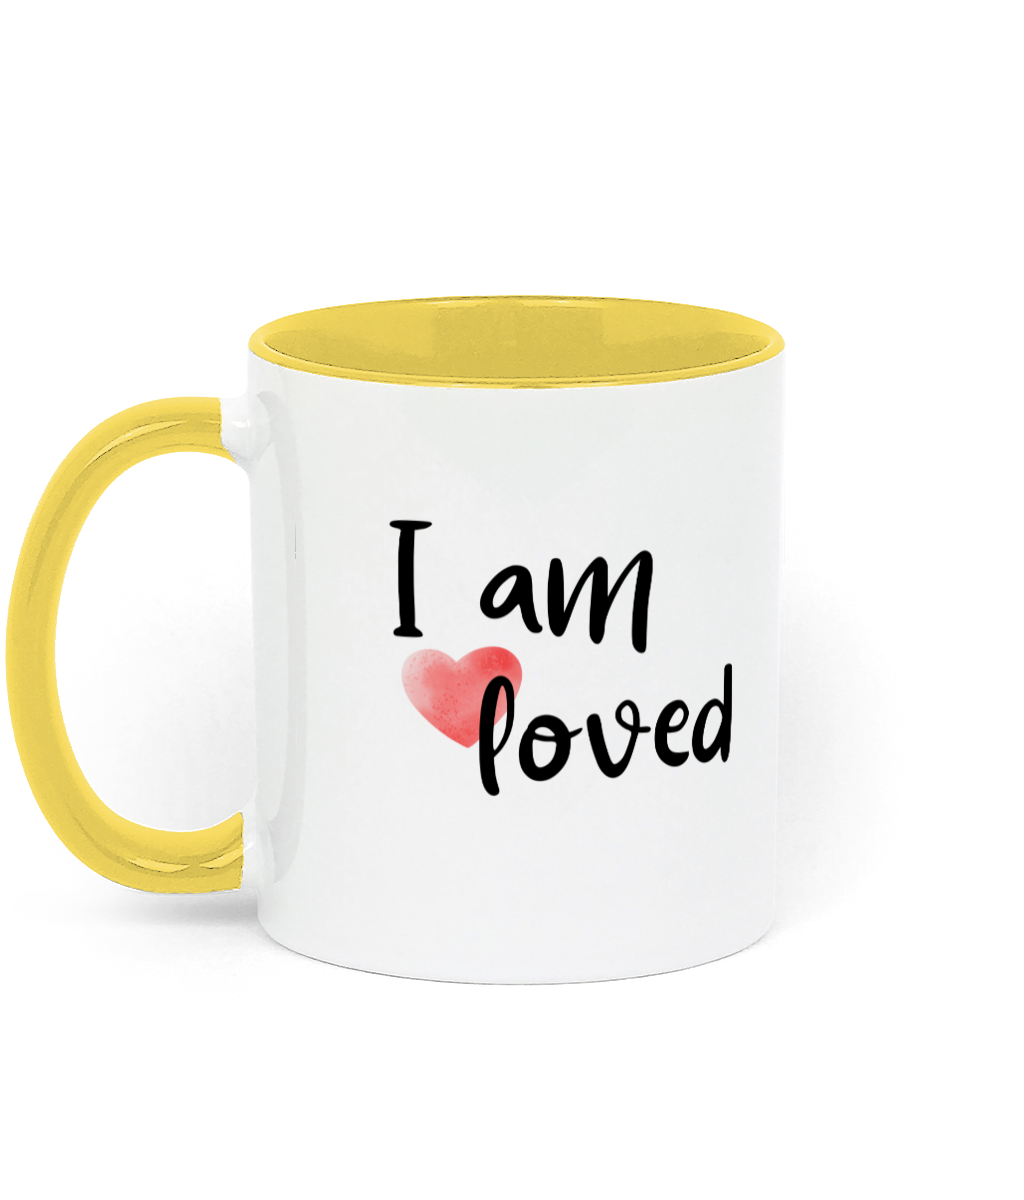 I Am Loved. .11 oz mug. Daily Affirmations, Motivation, Inspiration. Perfect Gift. Two-Toned. Yellow.